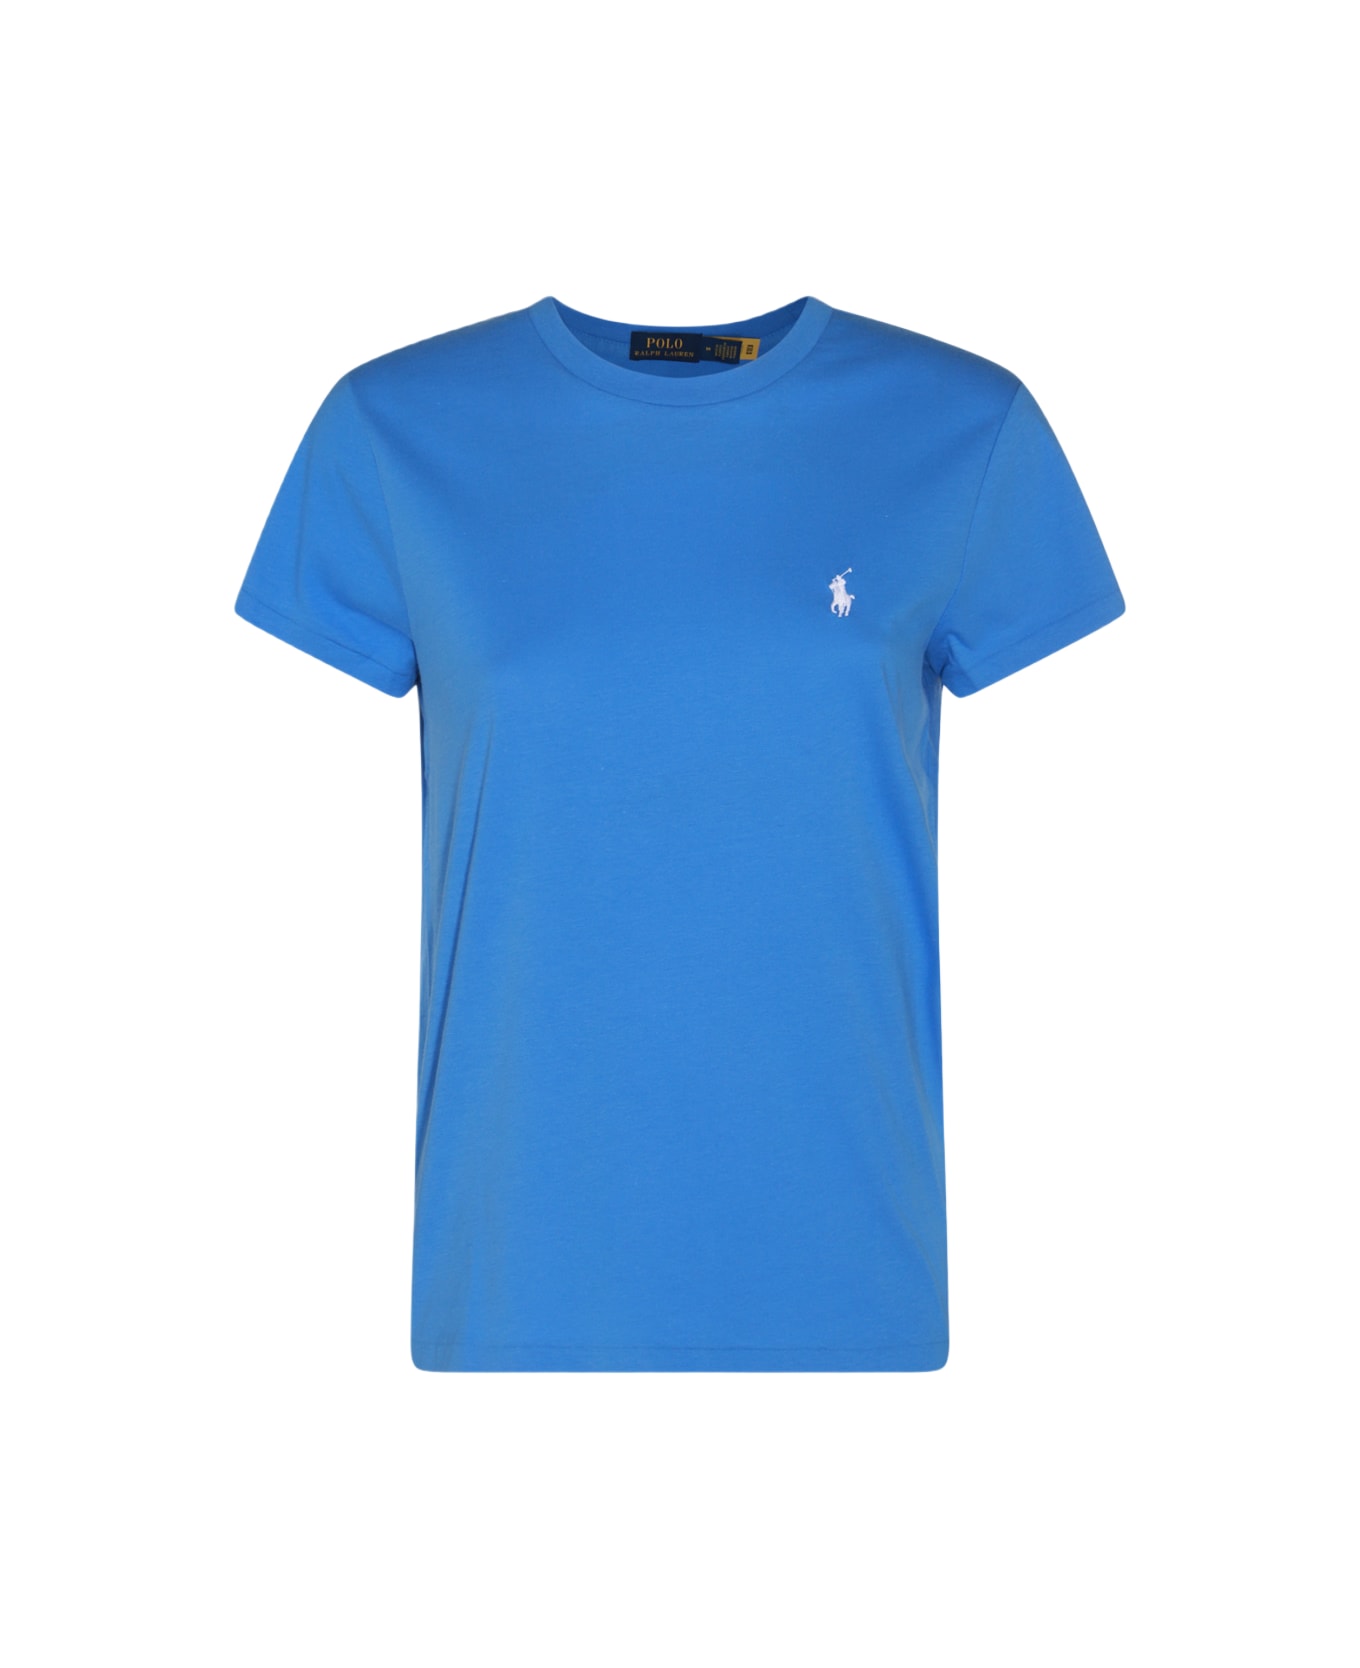 Polo Ralph Lauren Cobalt Blue And White Cotton T-shirt - COLBY BLUE